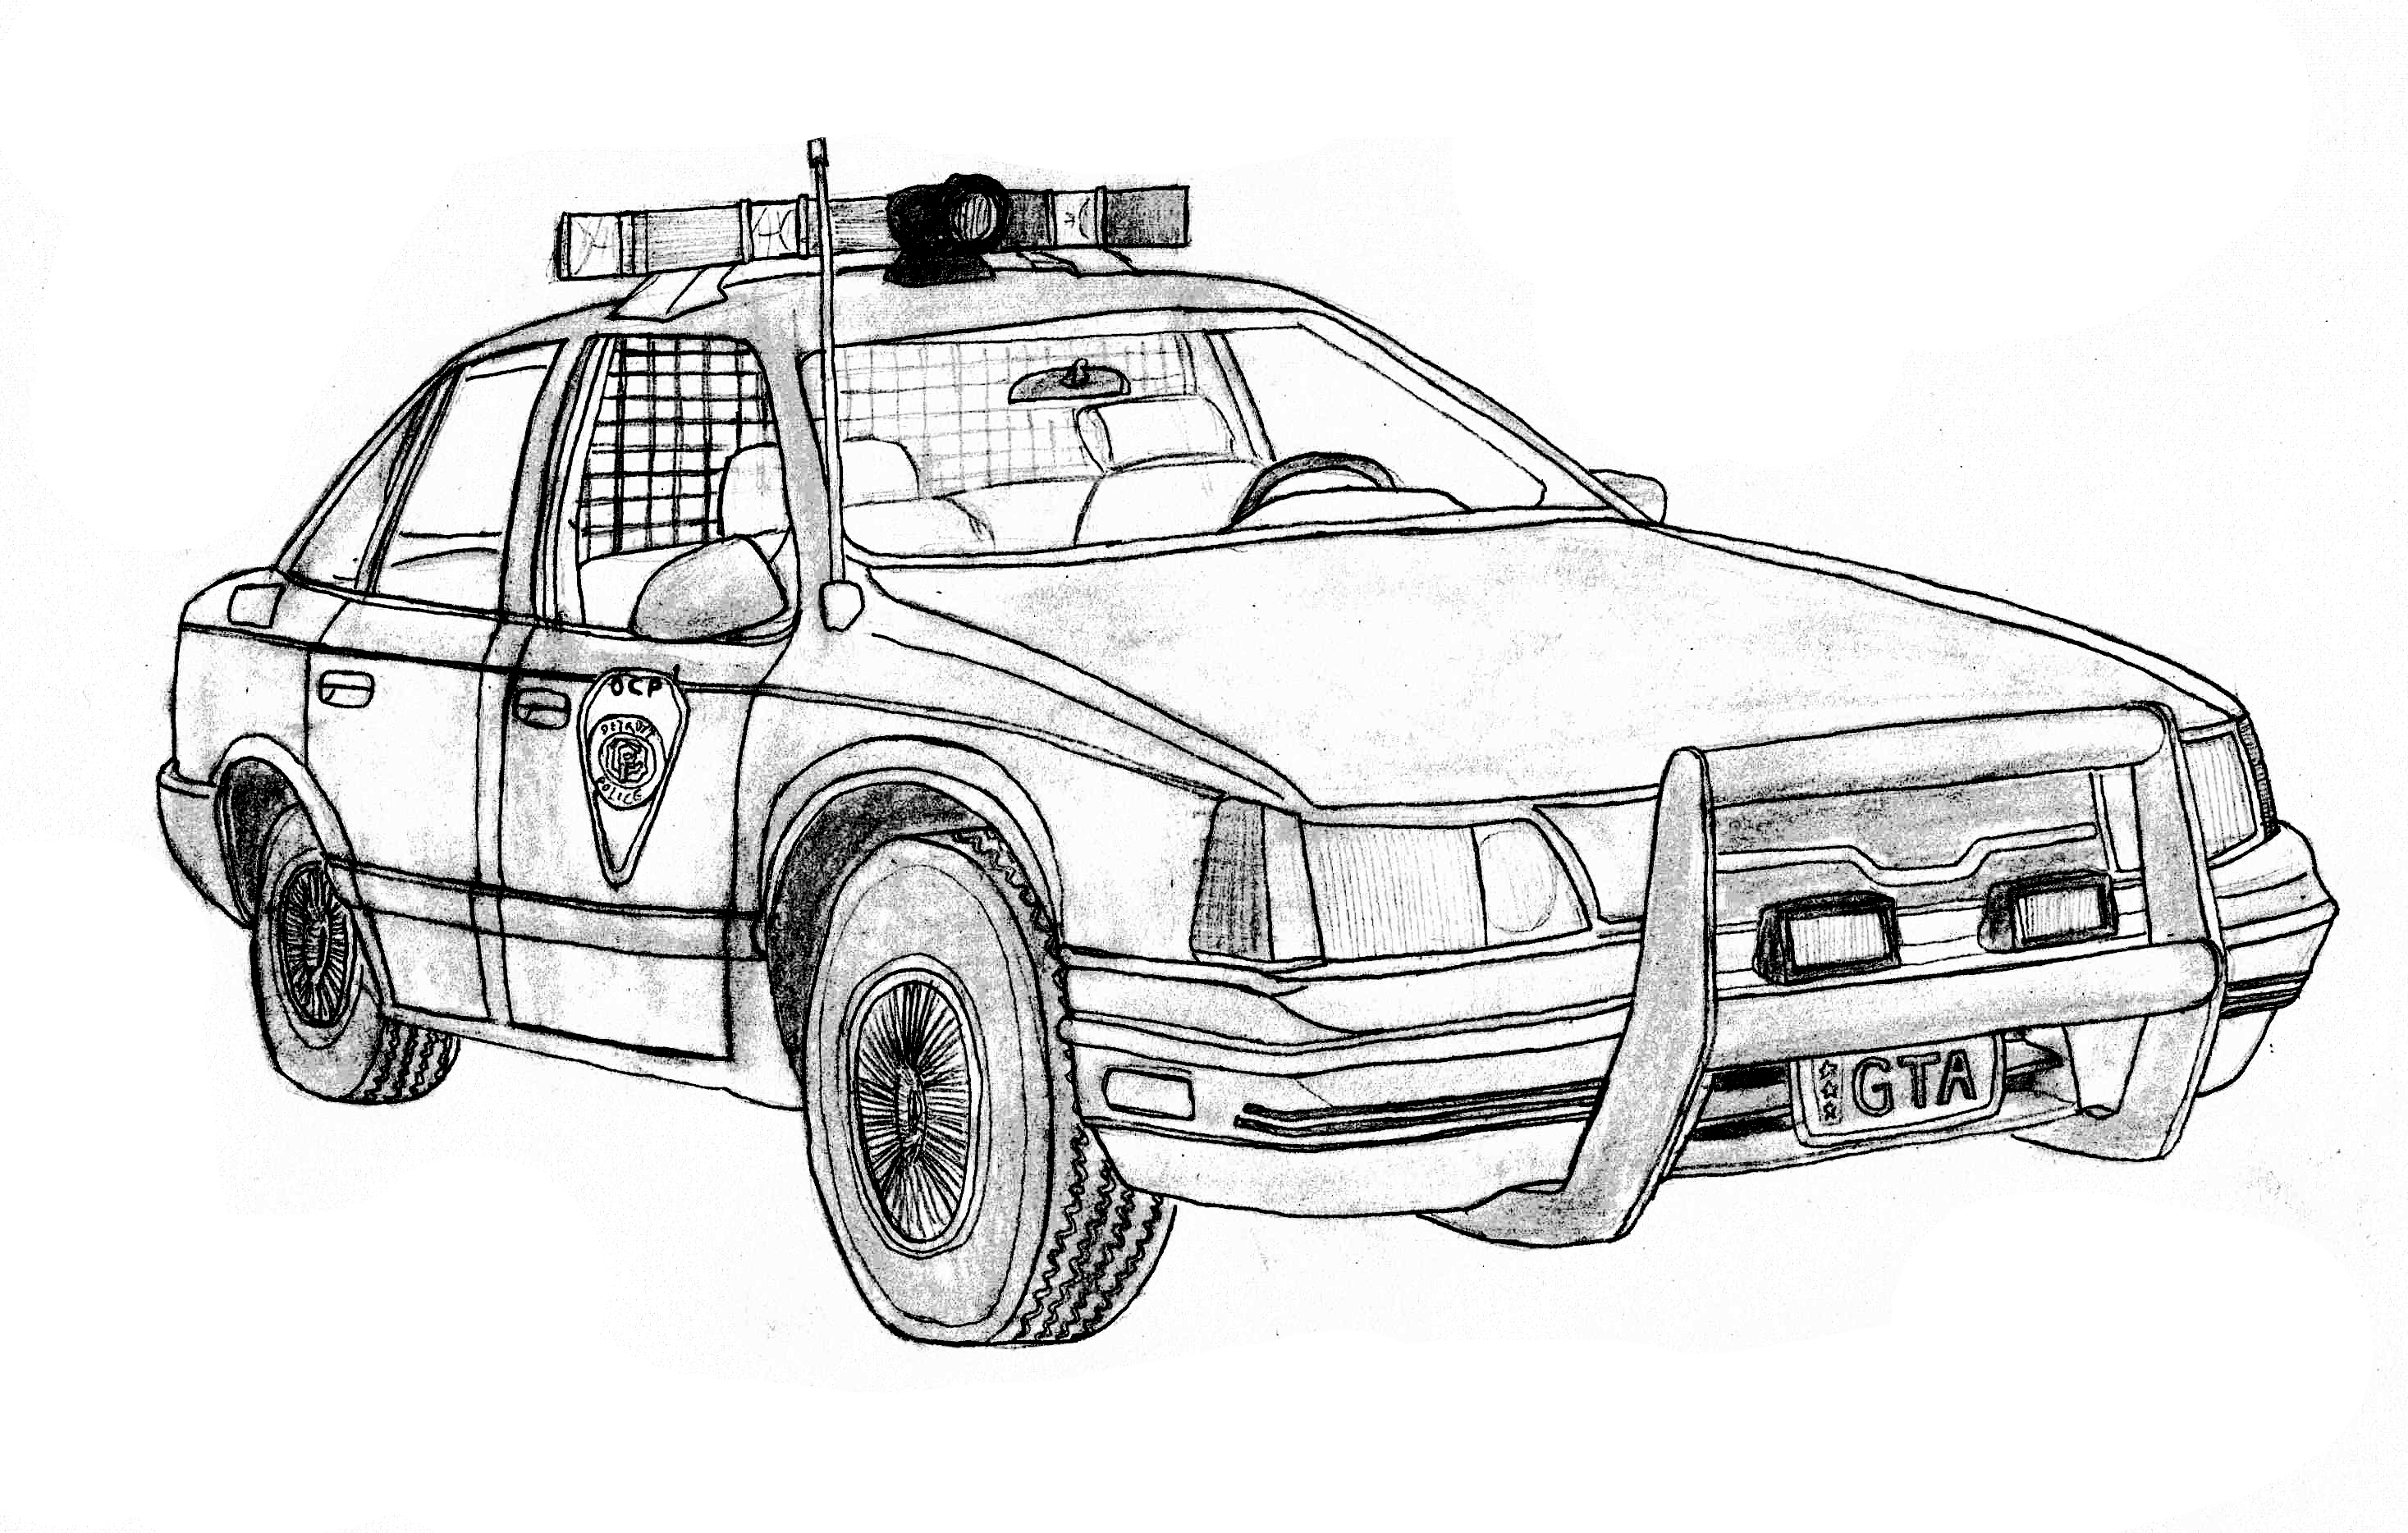 Police Car Drawing Realistic